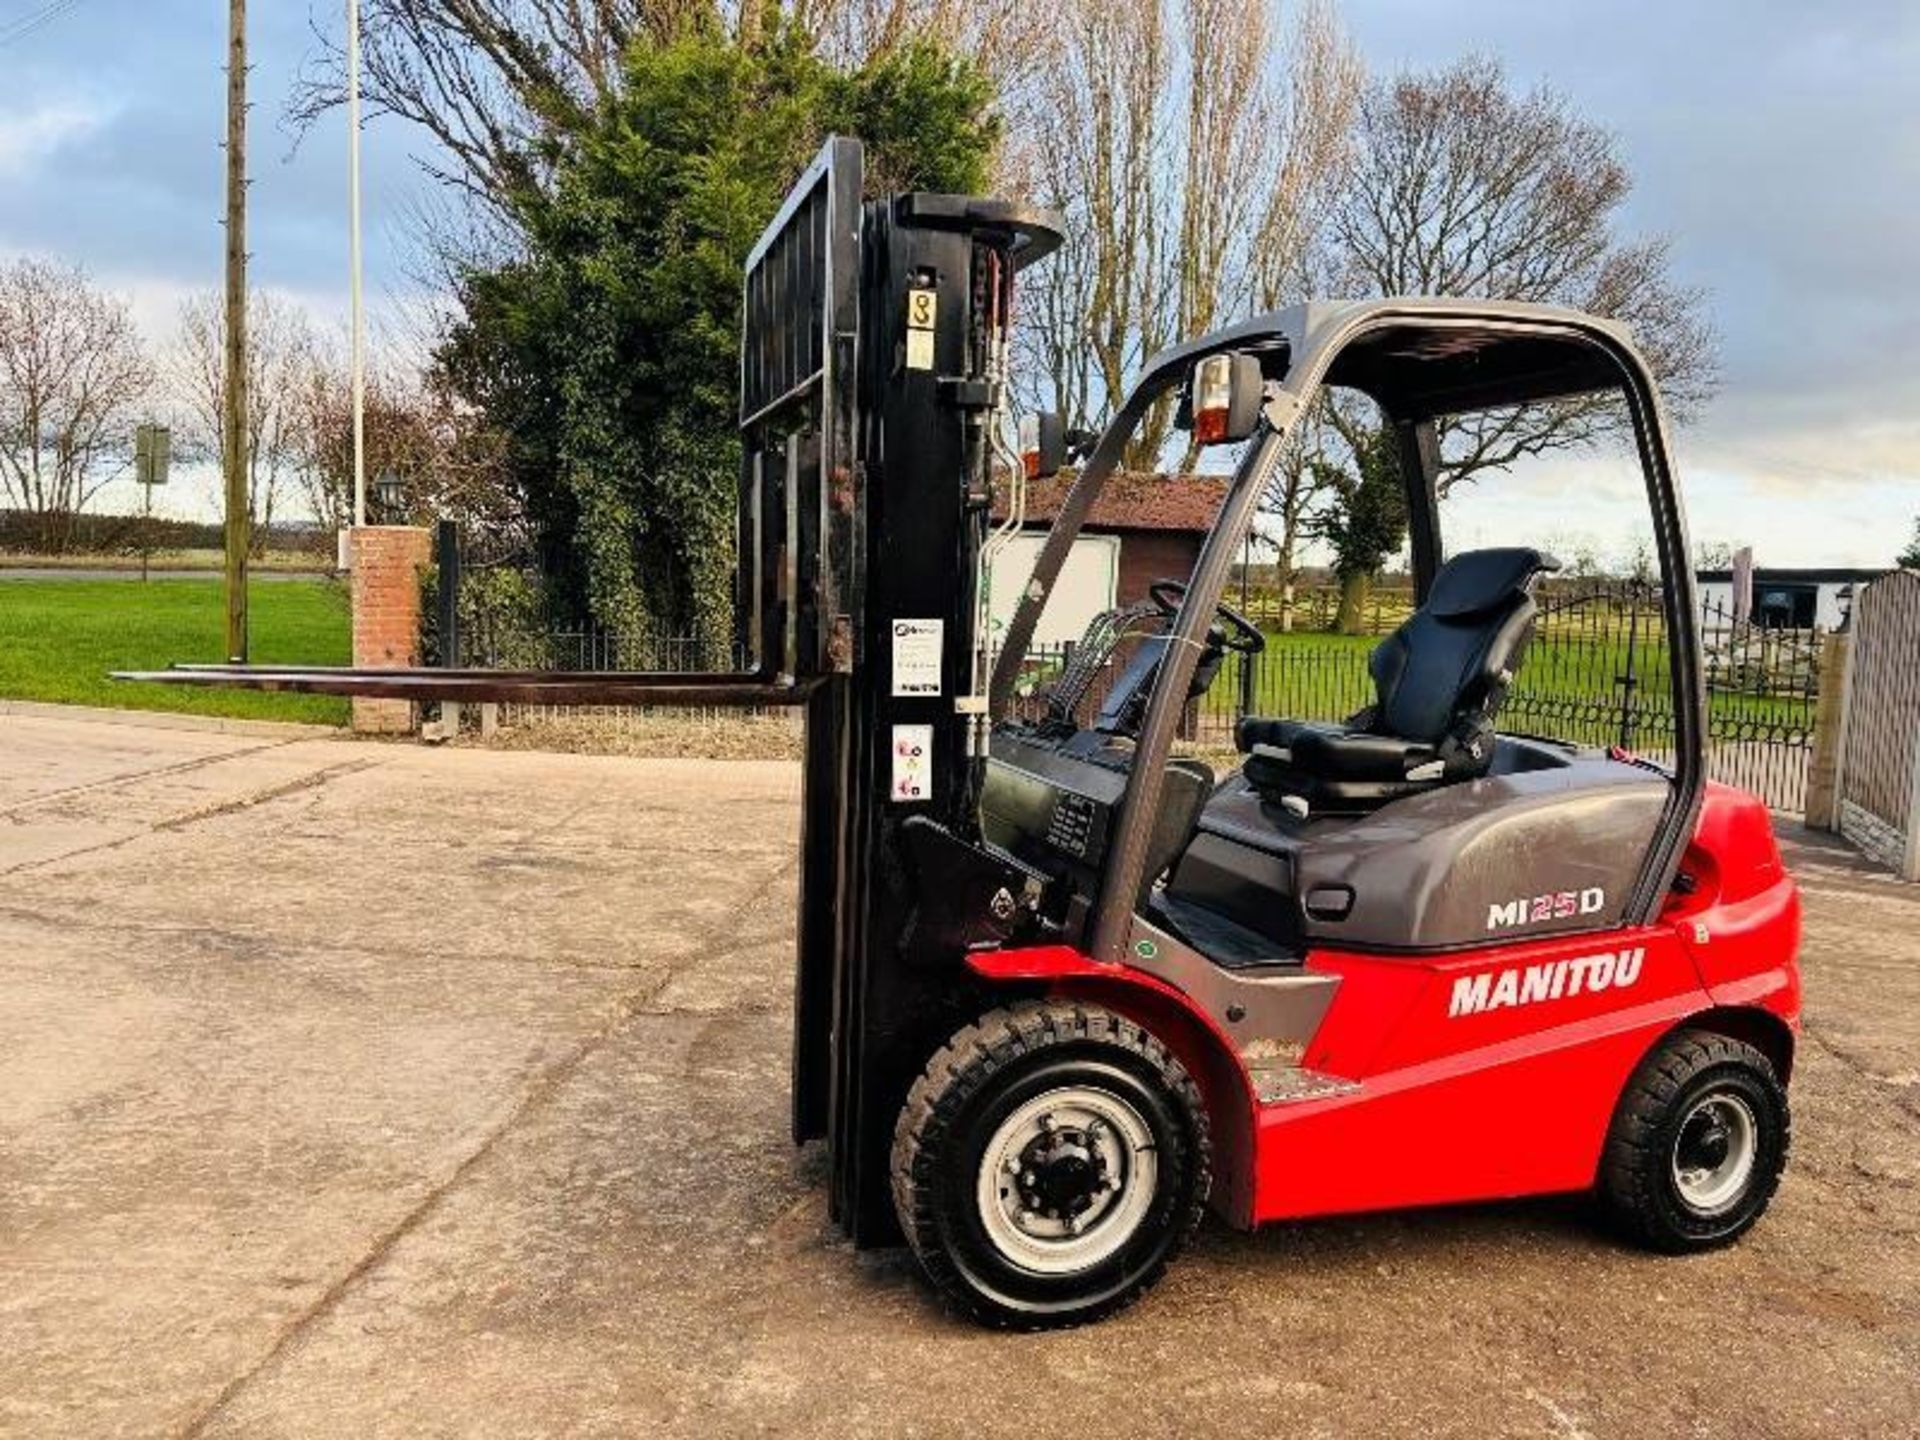 MANITOU MI25D CONTAINER SPEC FORKLIFT *YEAR 2018, 2660 HOURS* C/W SIDE SHIFT - Image 5 of 17